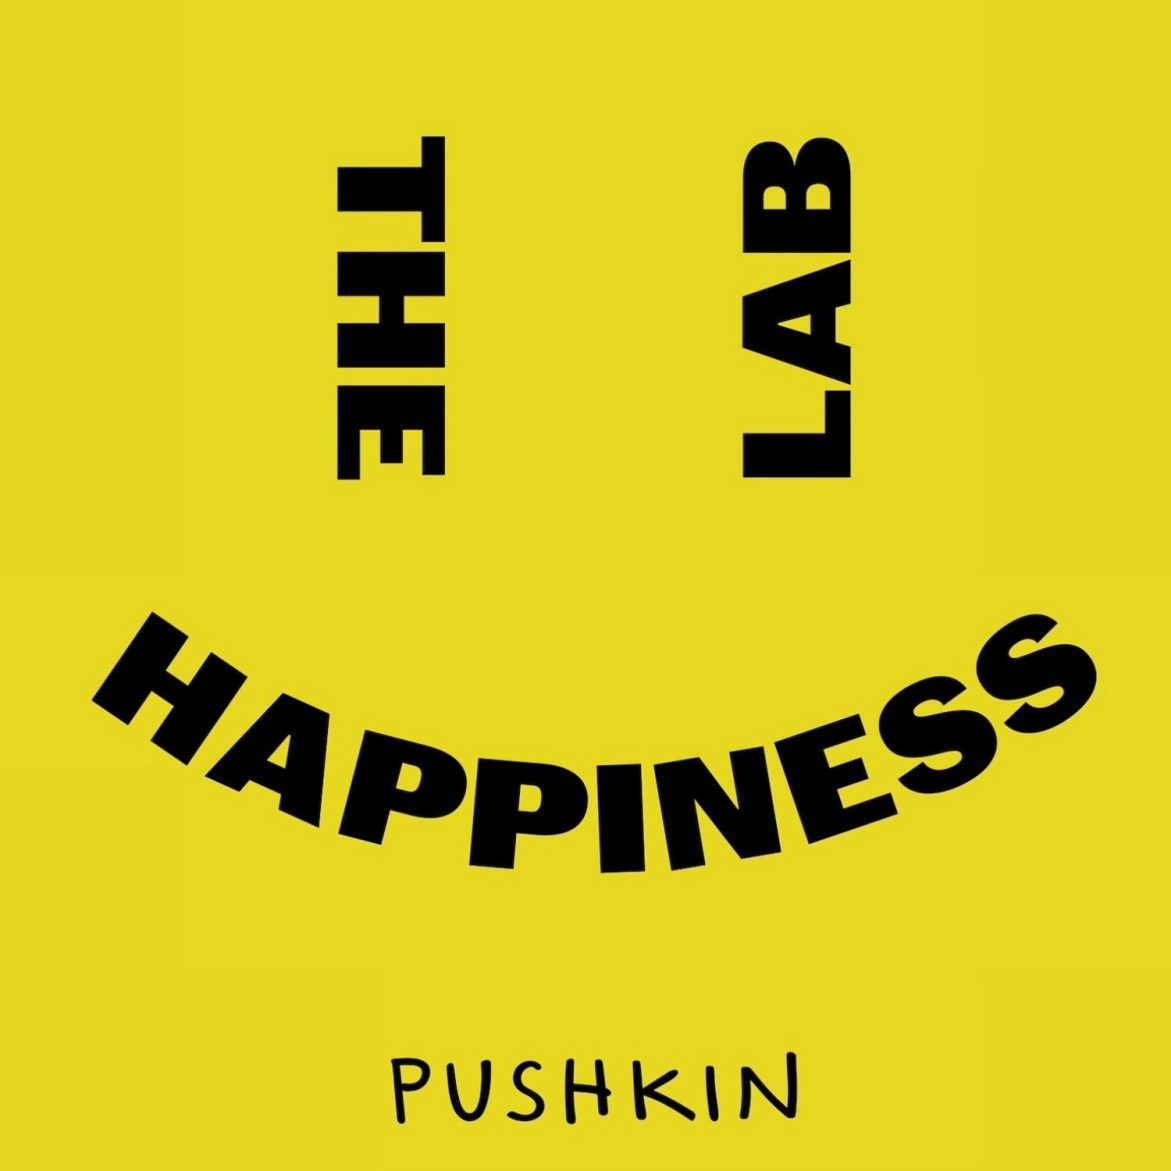 Black Podcasting - Introducing The Happiness Lab: Build the Life You Want... Advice from Arthur Brooks and Oprah